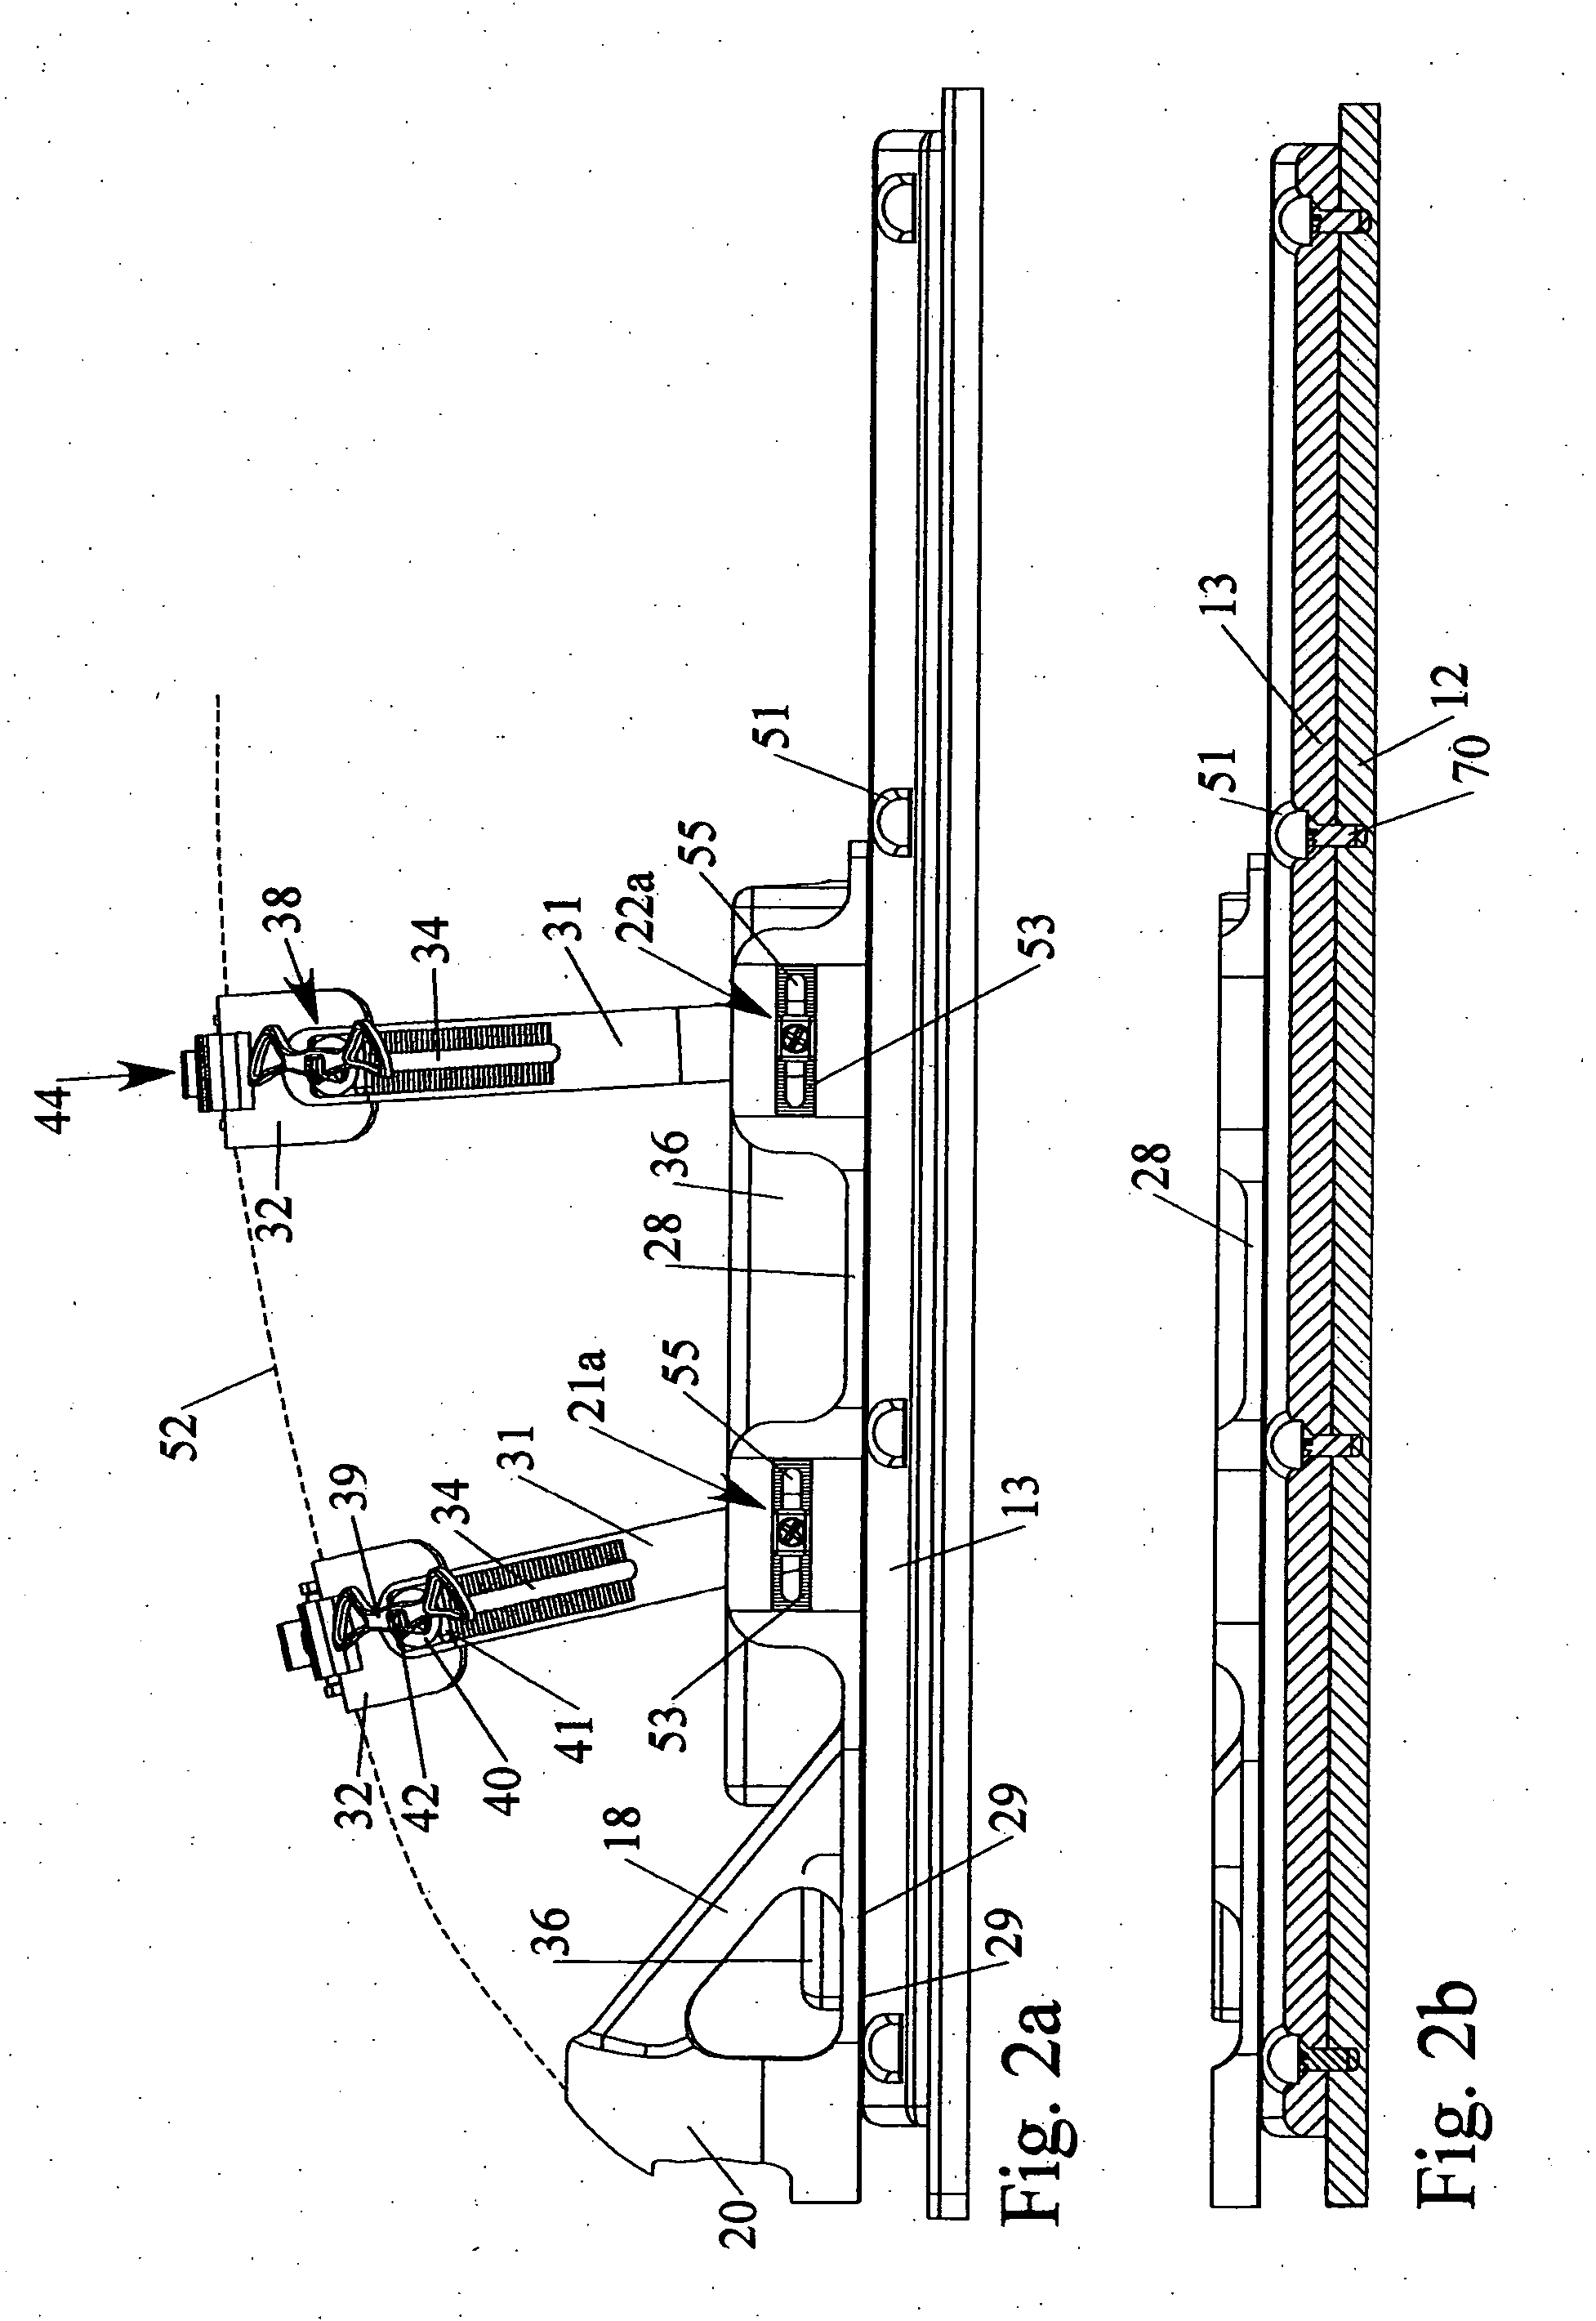 Device for retaining a kneeling rider on a gliding board